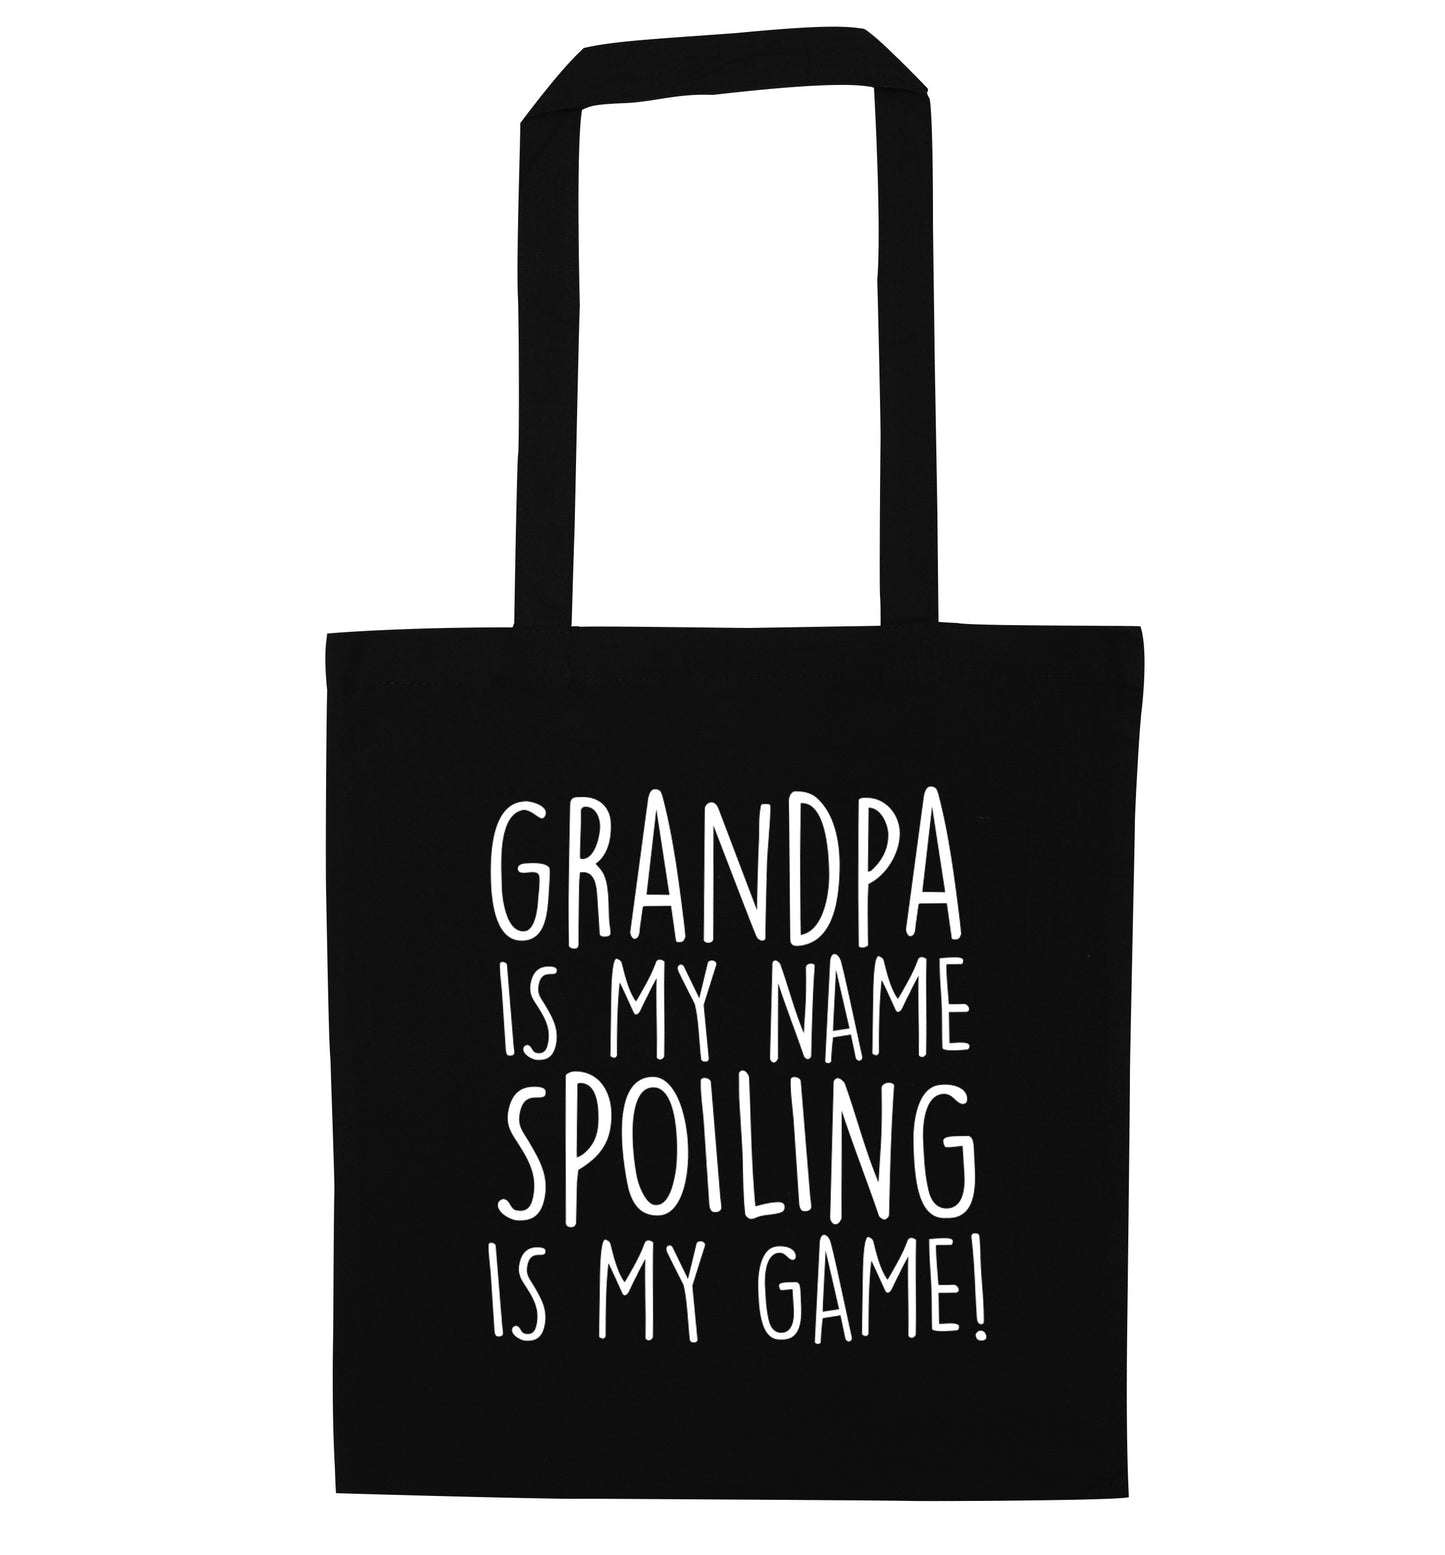 Grandpa is my name, spoiling is my game black tote bag